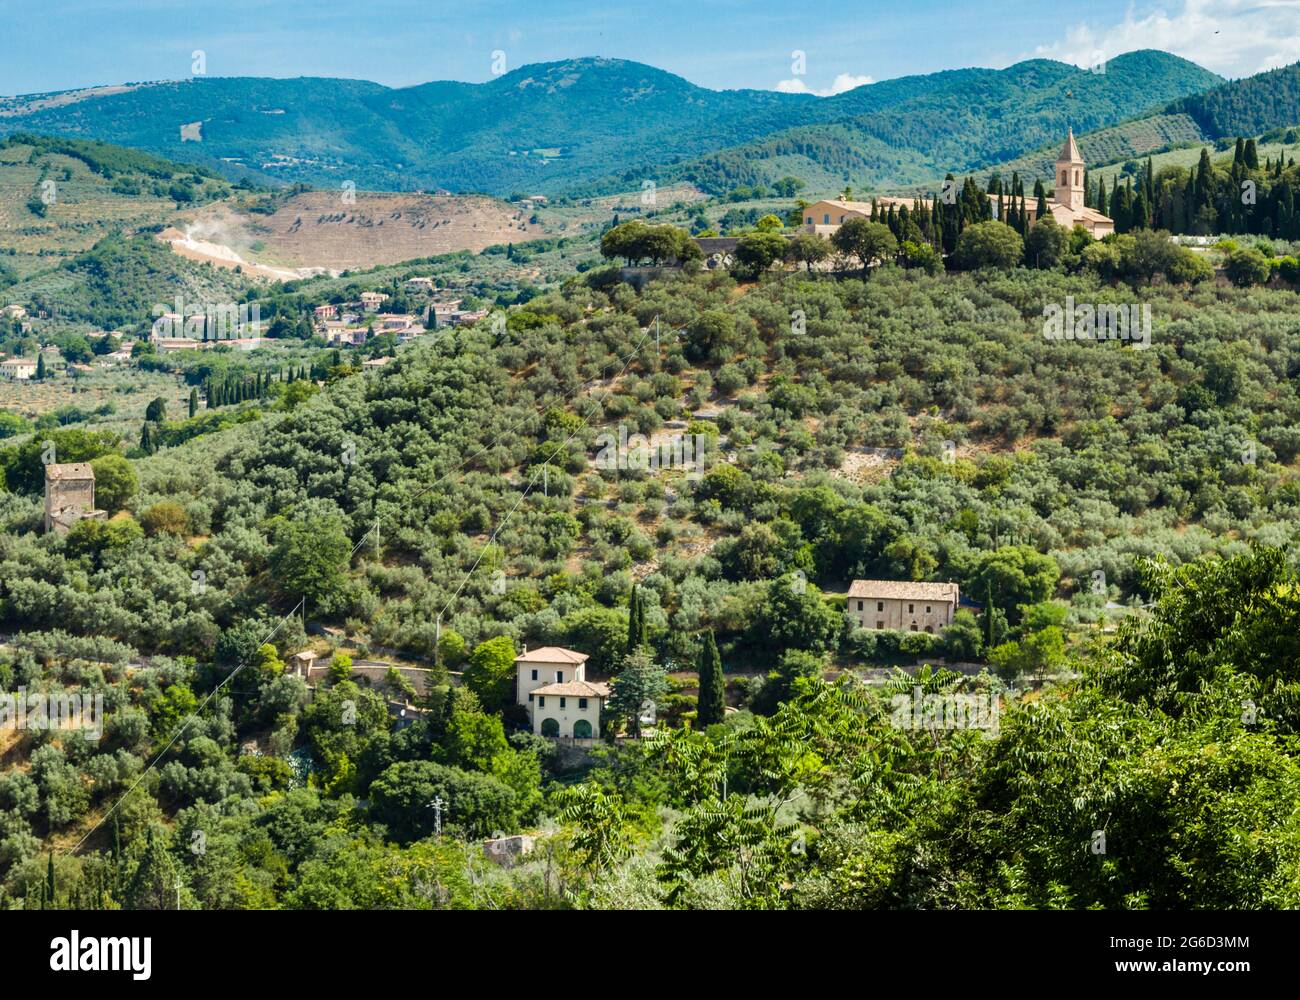 View north from Trevi overlooking the hillside with  the Convento San Martino siting on top. The Apennines in the distance, June 2021 Stock Photo